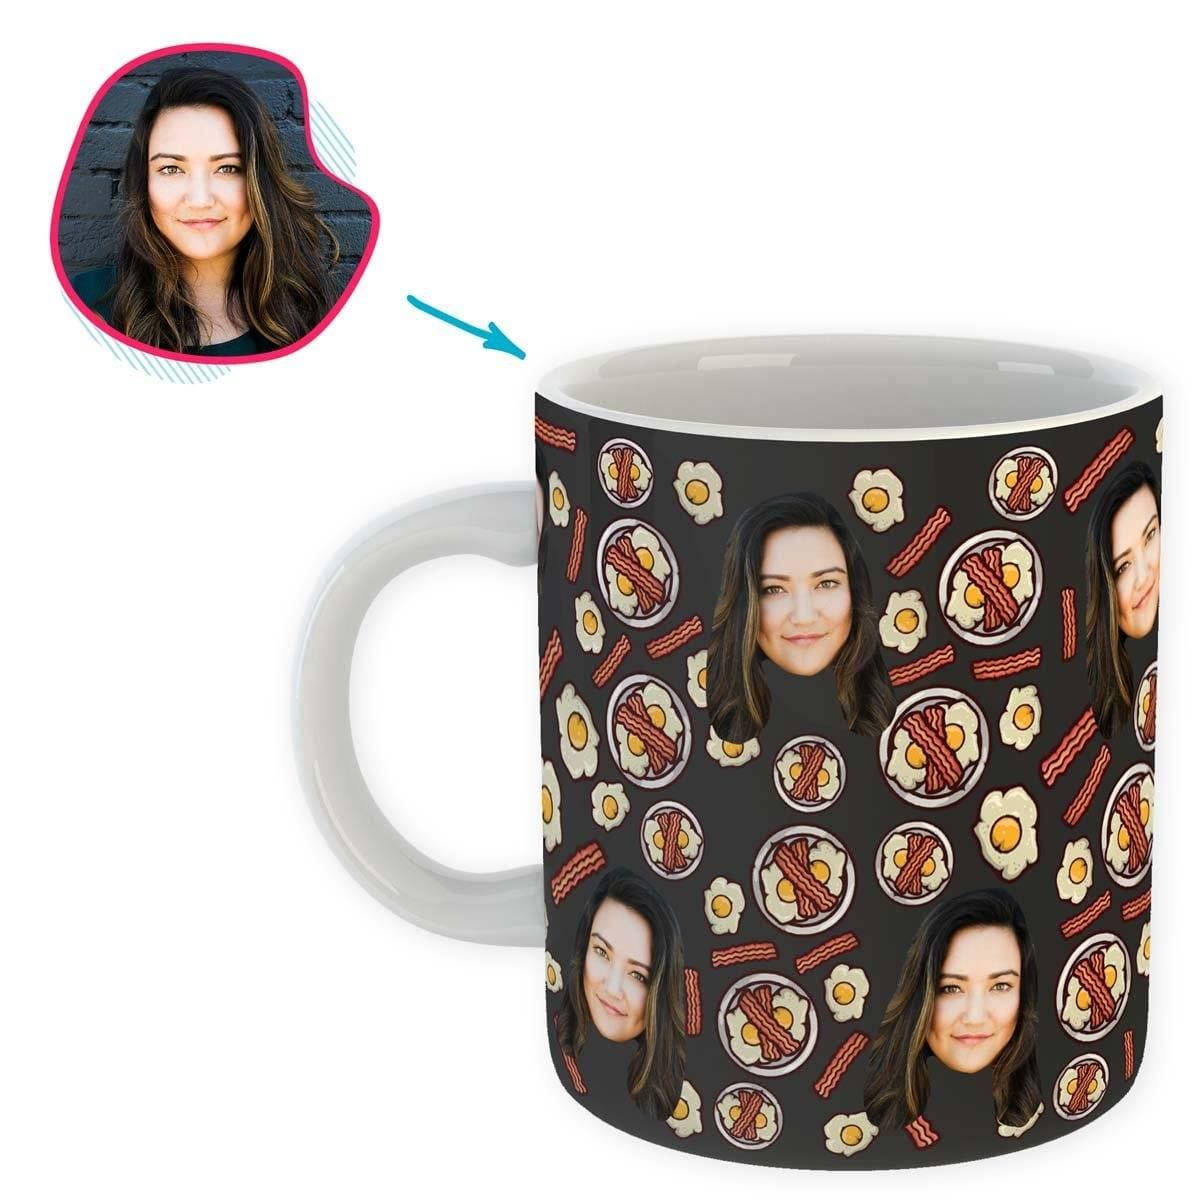 dark Bacon and Eggs mug personalized with photo of face printed on it